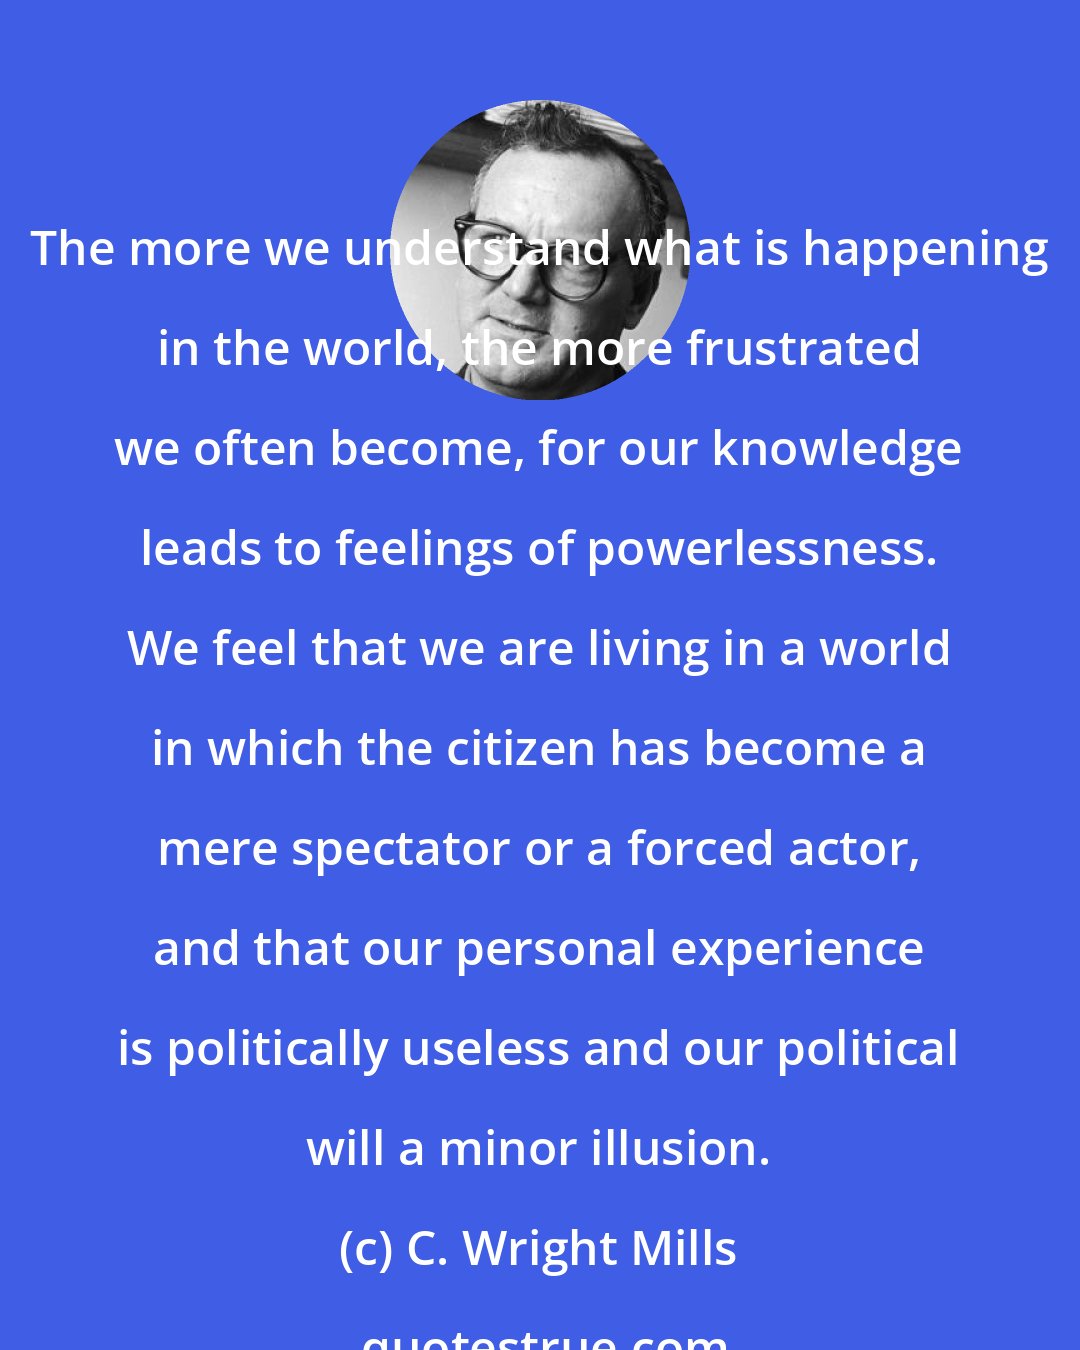 C. Wright Mills: The more we understand what is happening in the world, the more frustrated we often become, for our knowledge leads to feelings of powerlessness. We feel that we are living in a world in which the citizen has become a mere spectator or a forced actor, and that our personal experience is politically useless and our political will a minor illusion.